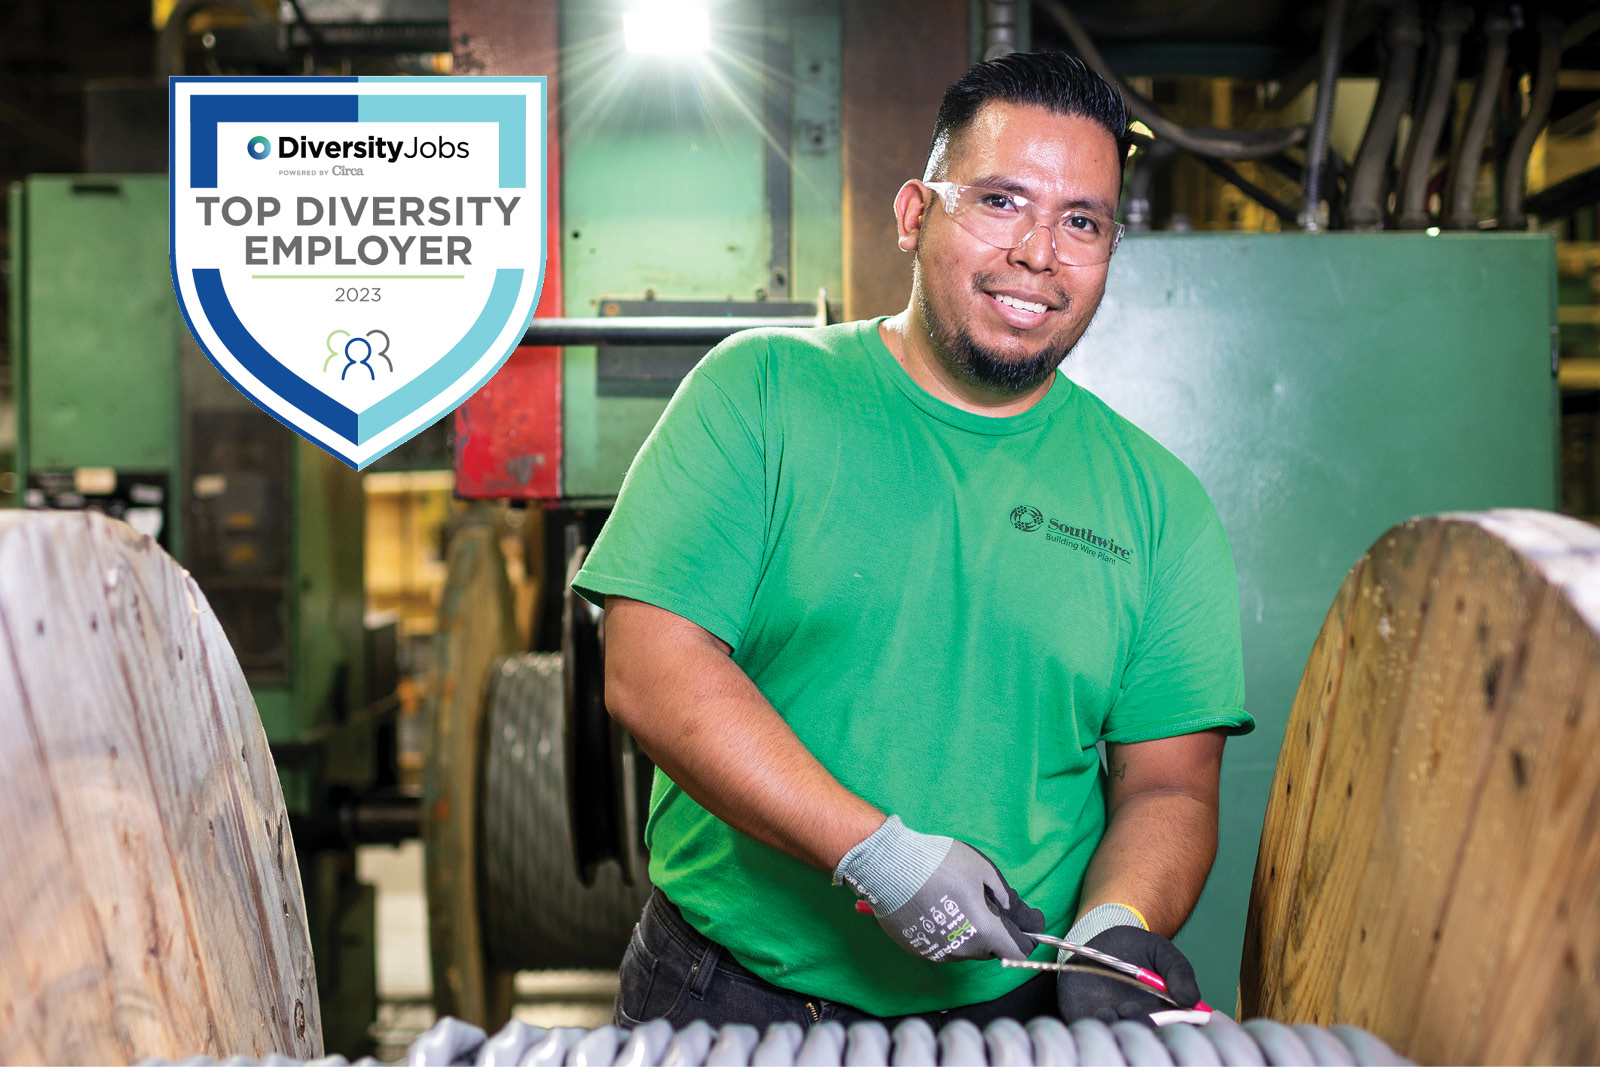  Southwire Named Top Diversity Employer by DiversityJobs.com